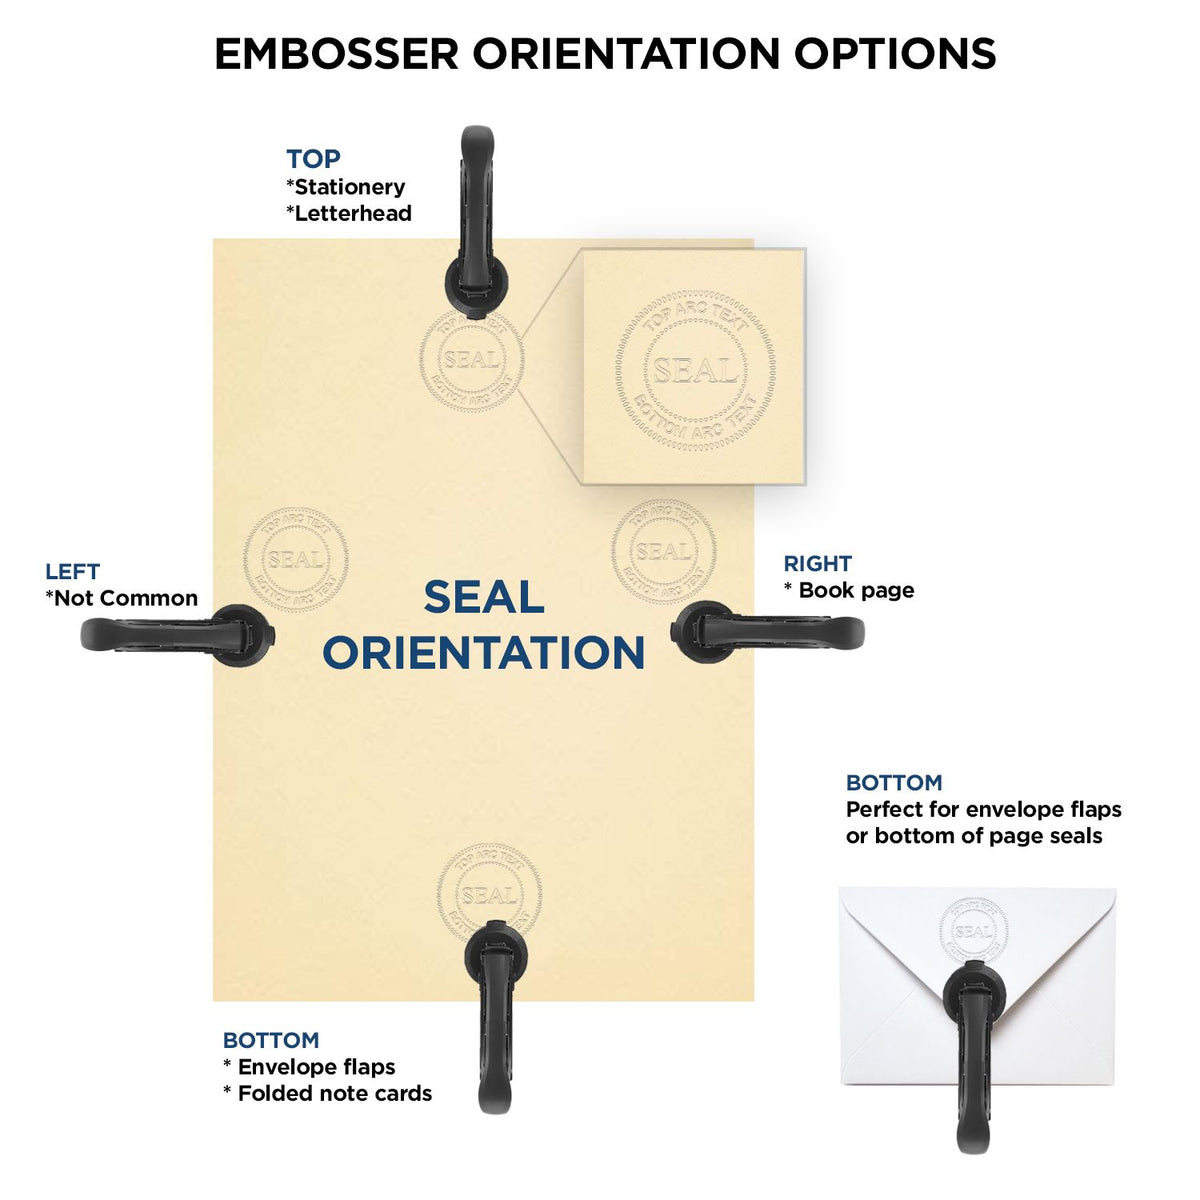 An infographic for the Handheld Nevada Architect Seal Embosser showing embosser orientation, this is showing examples of a top, bottom, right and left insert.